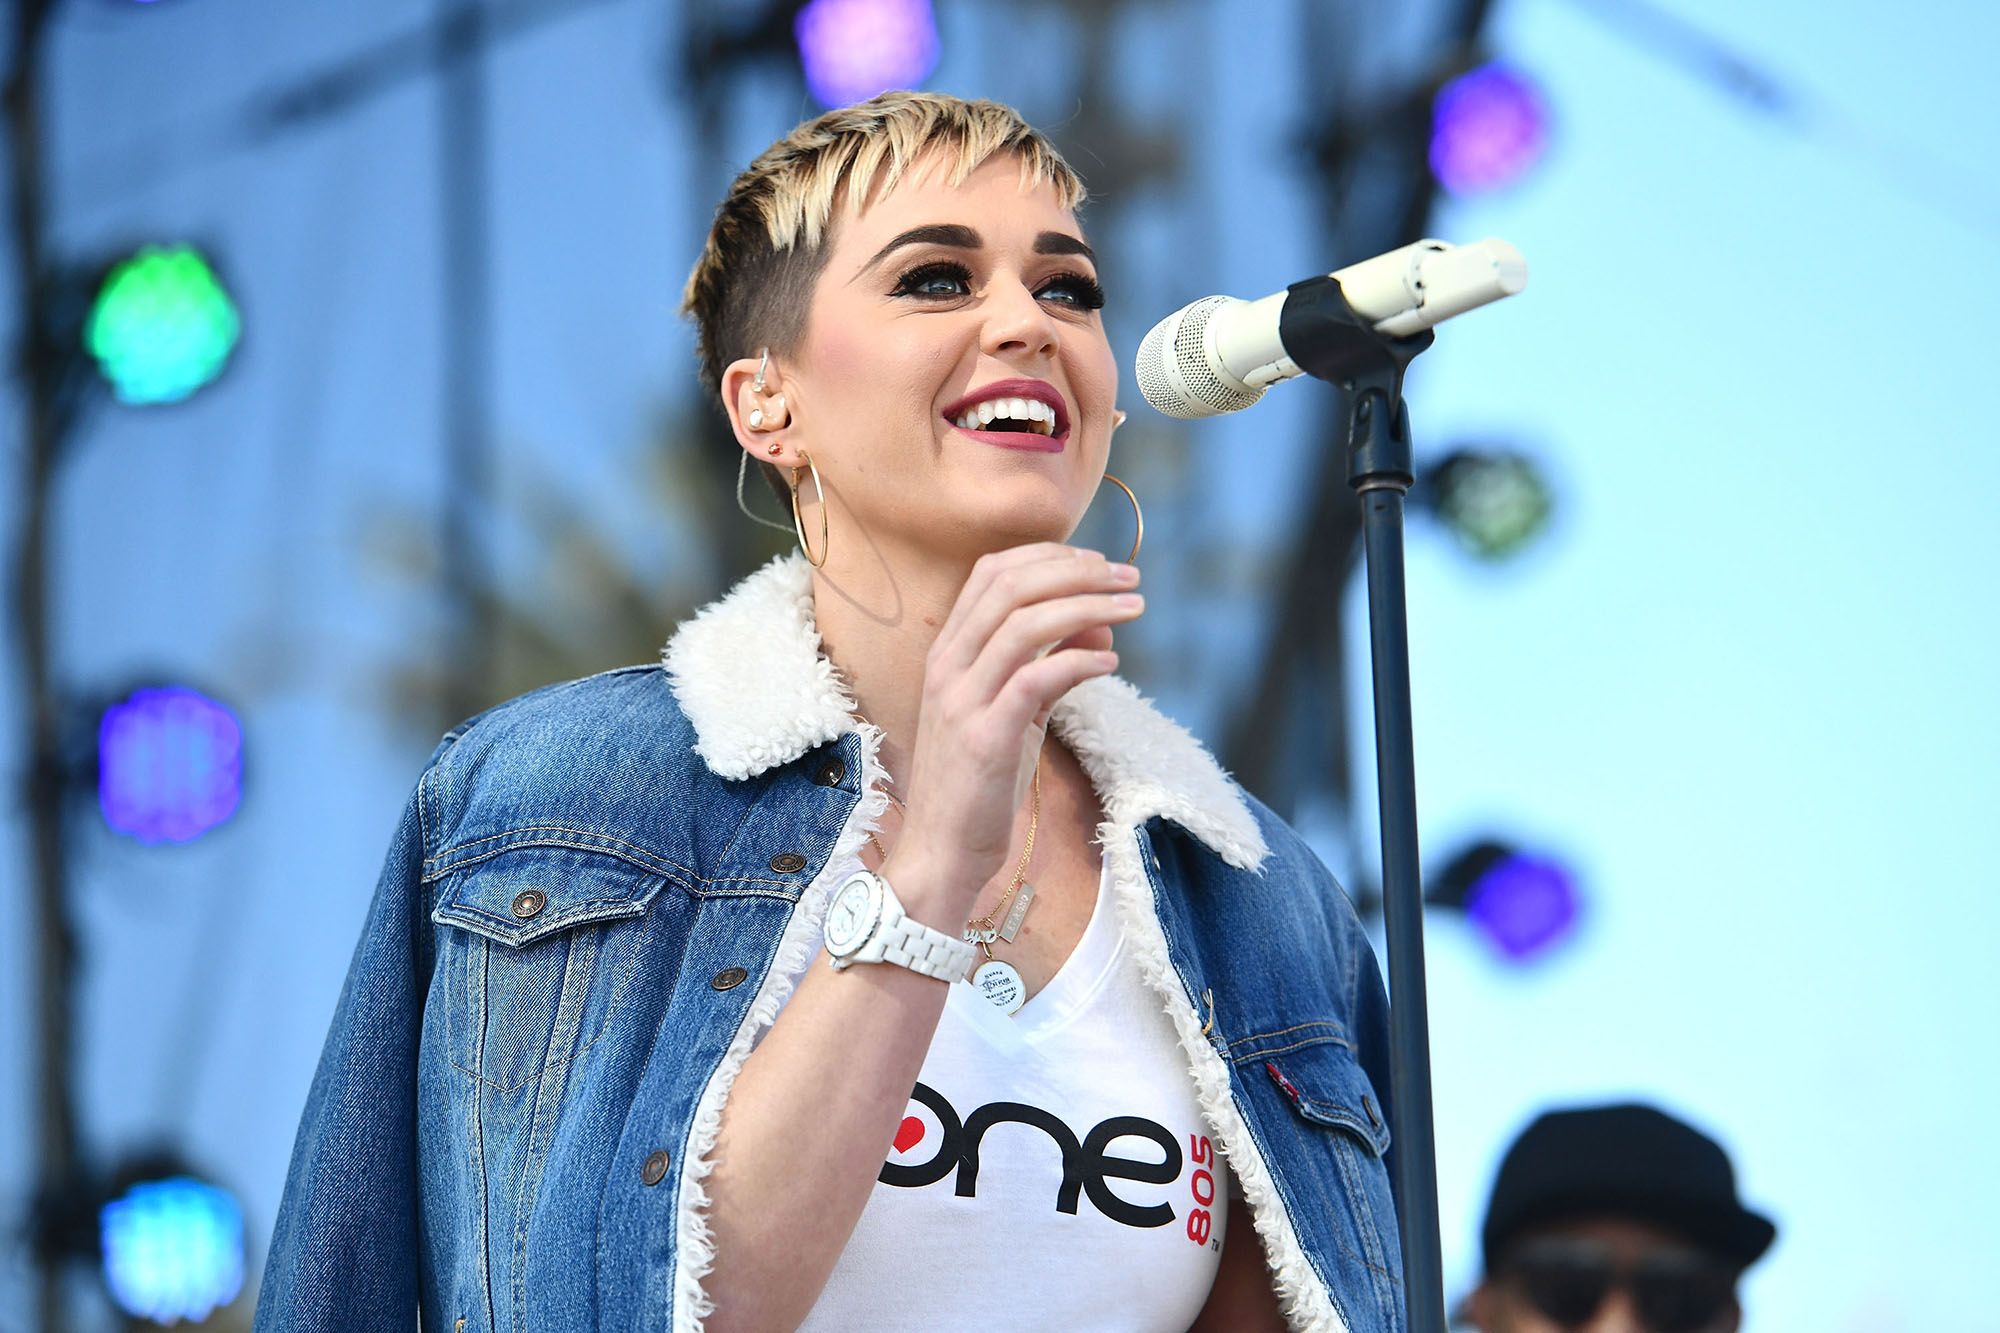 Katy Perry on stage performing